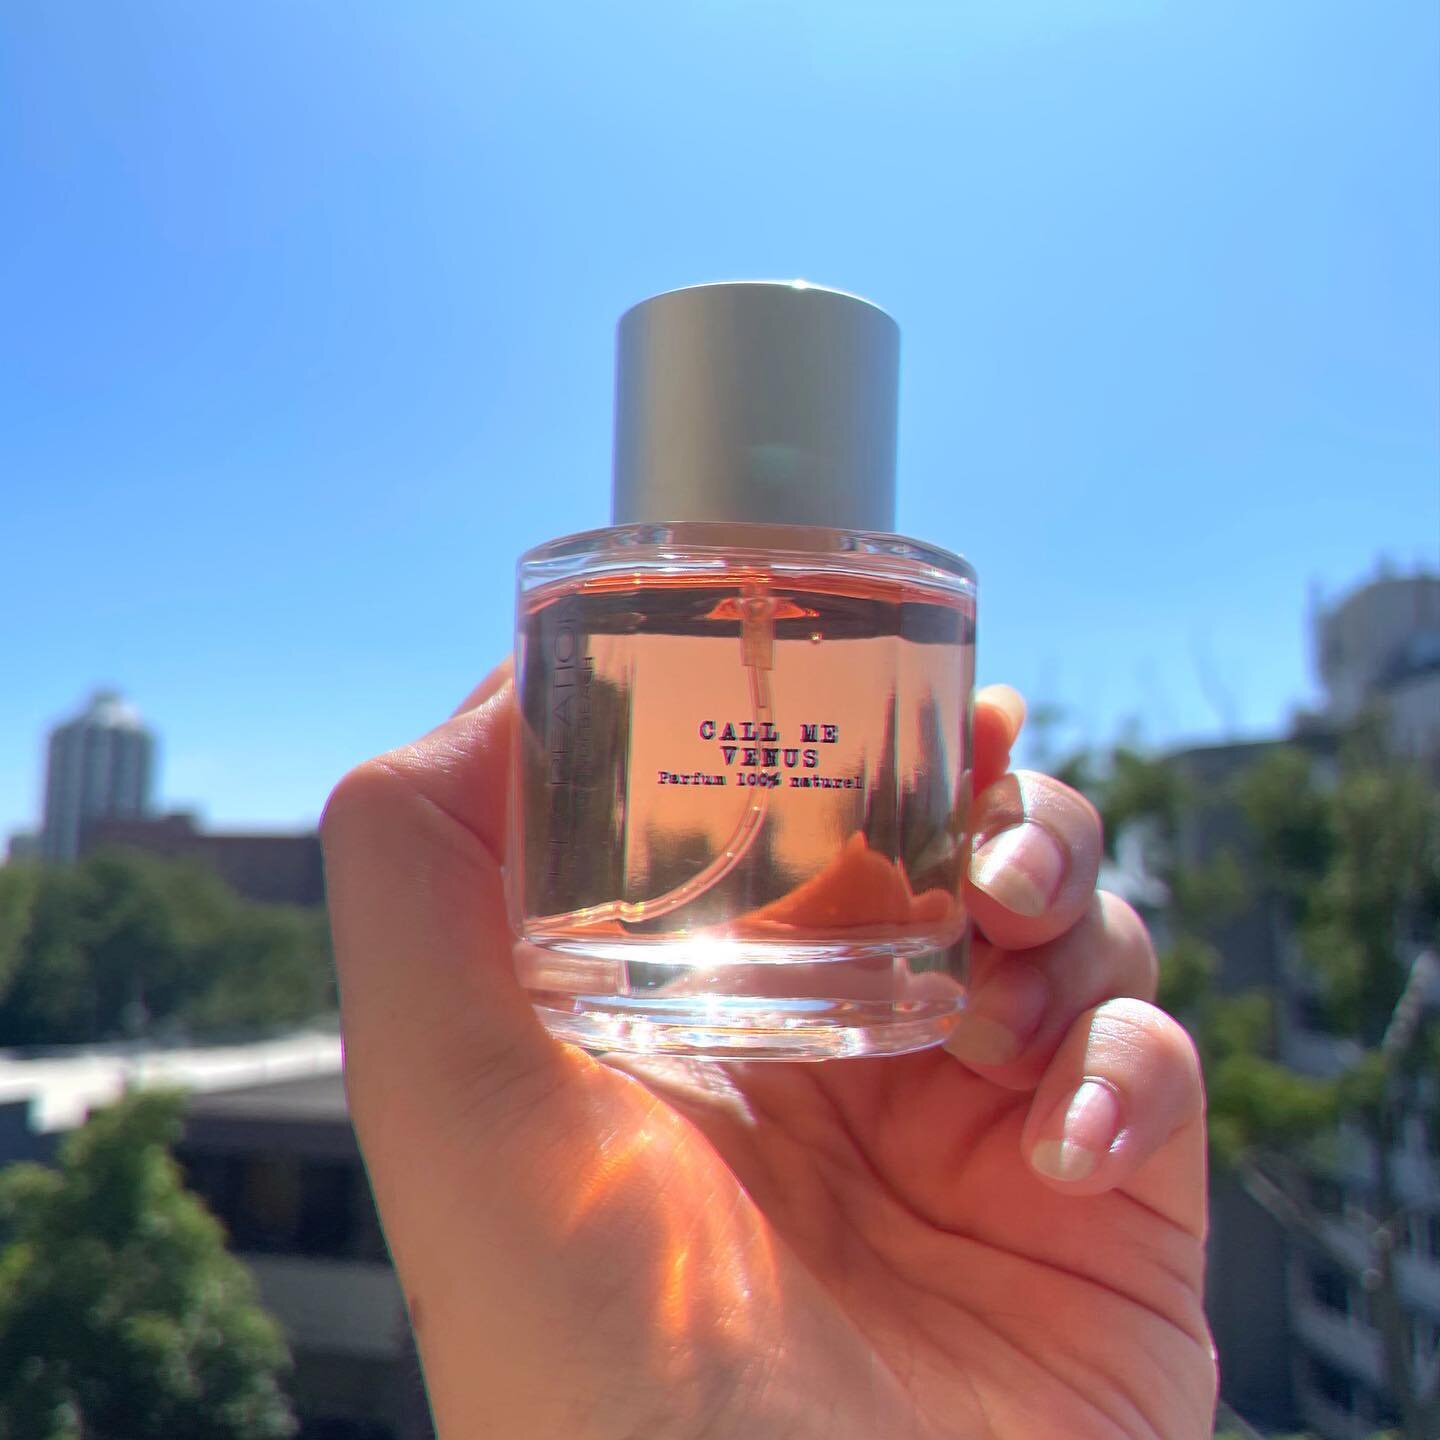 Fragrance of the month: Call Me Venus by @recreationbeauty 

Top Notes: Cassis, lemon, peach
Mid Notes: Rose, geranium, clary sage, neroli,
Base Notes: Orris, Cedarwood

This perfume is like walking through a rose garden, it&rsquo;s so light and deli